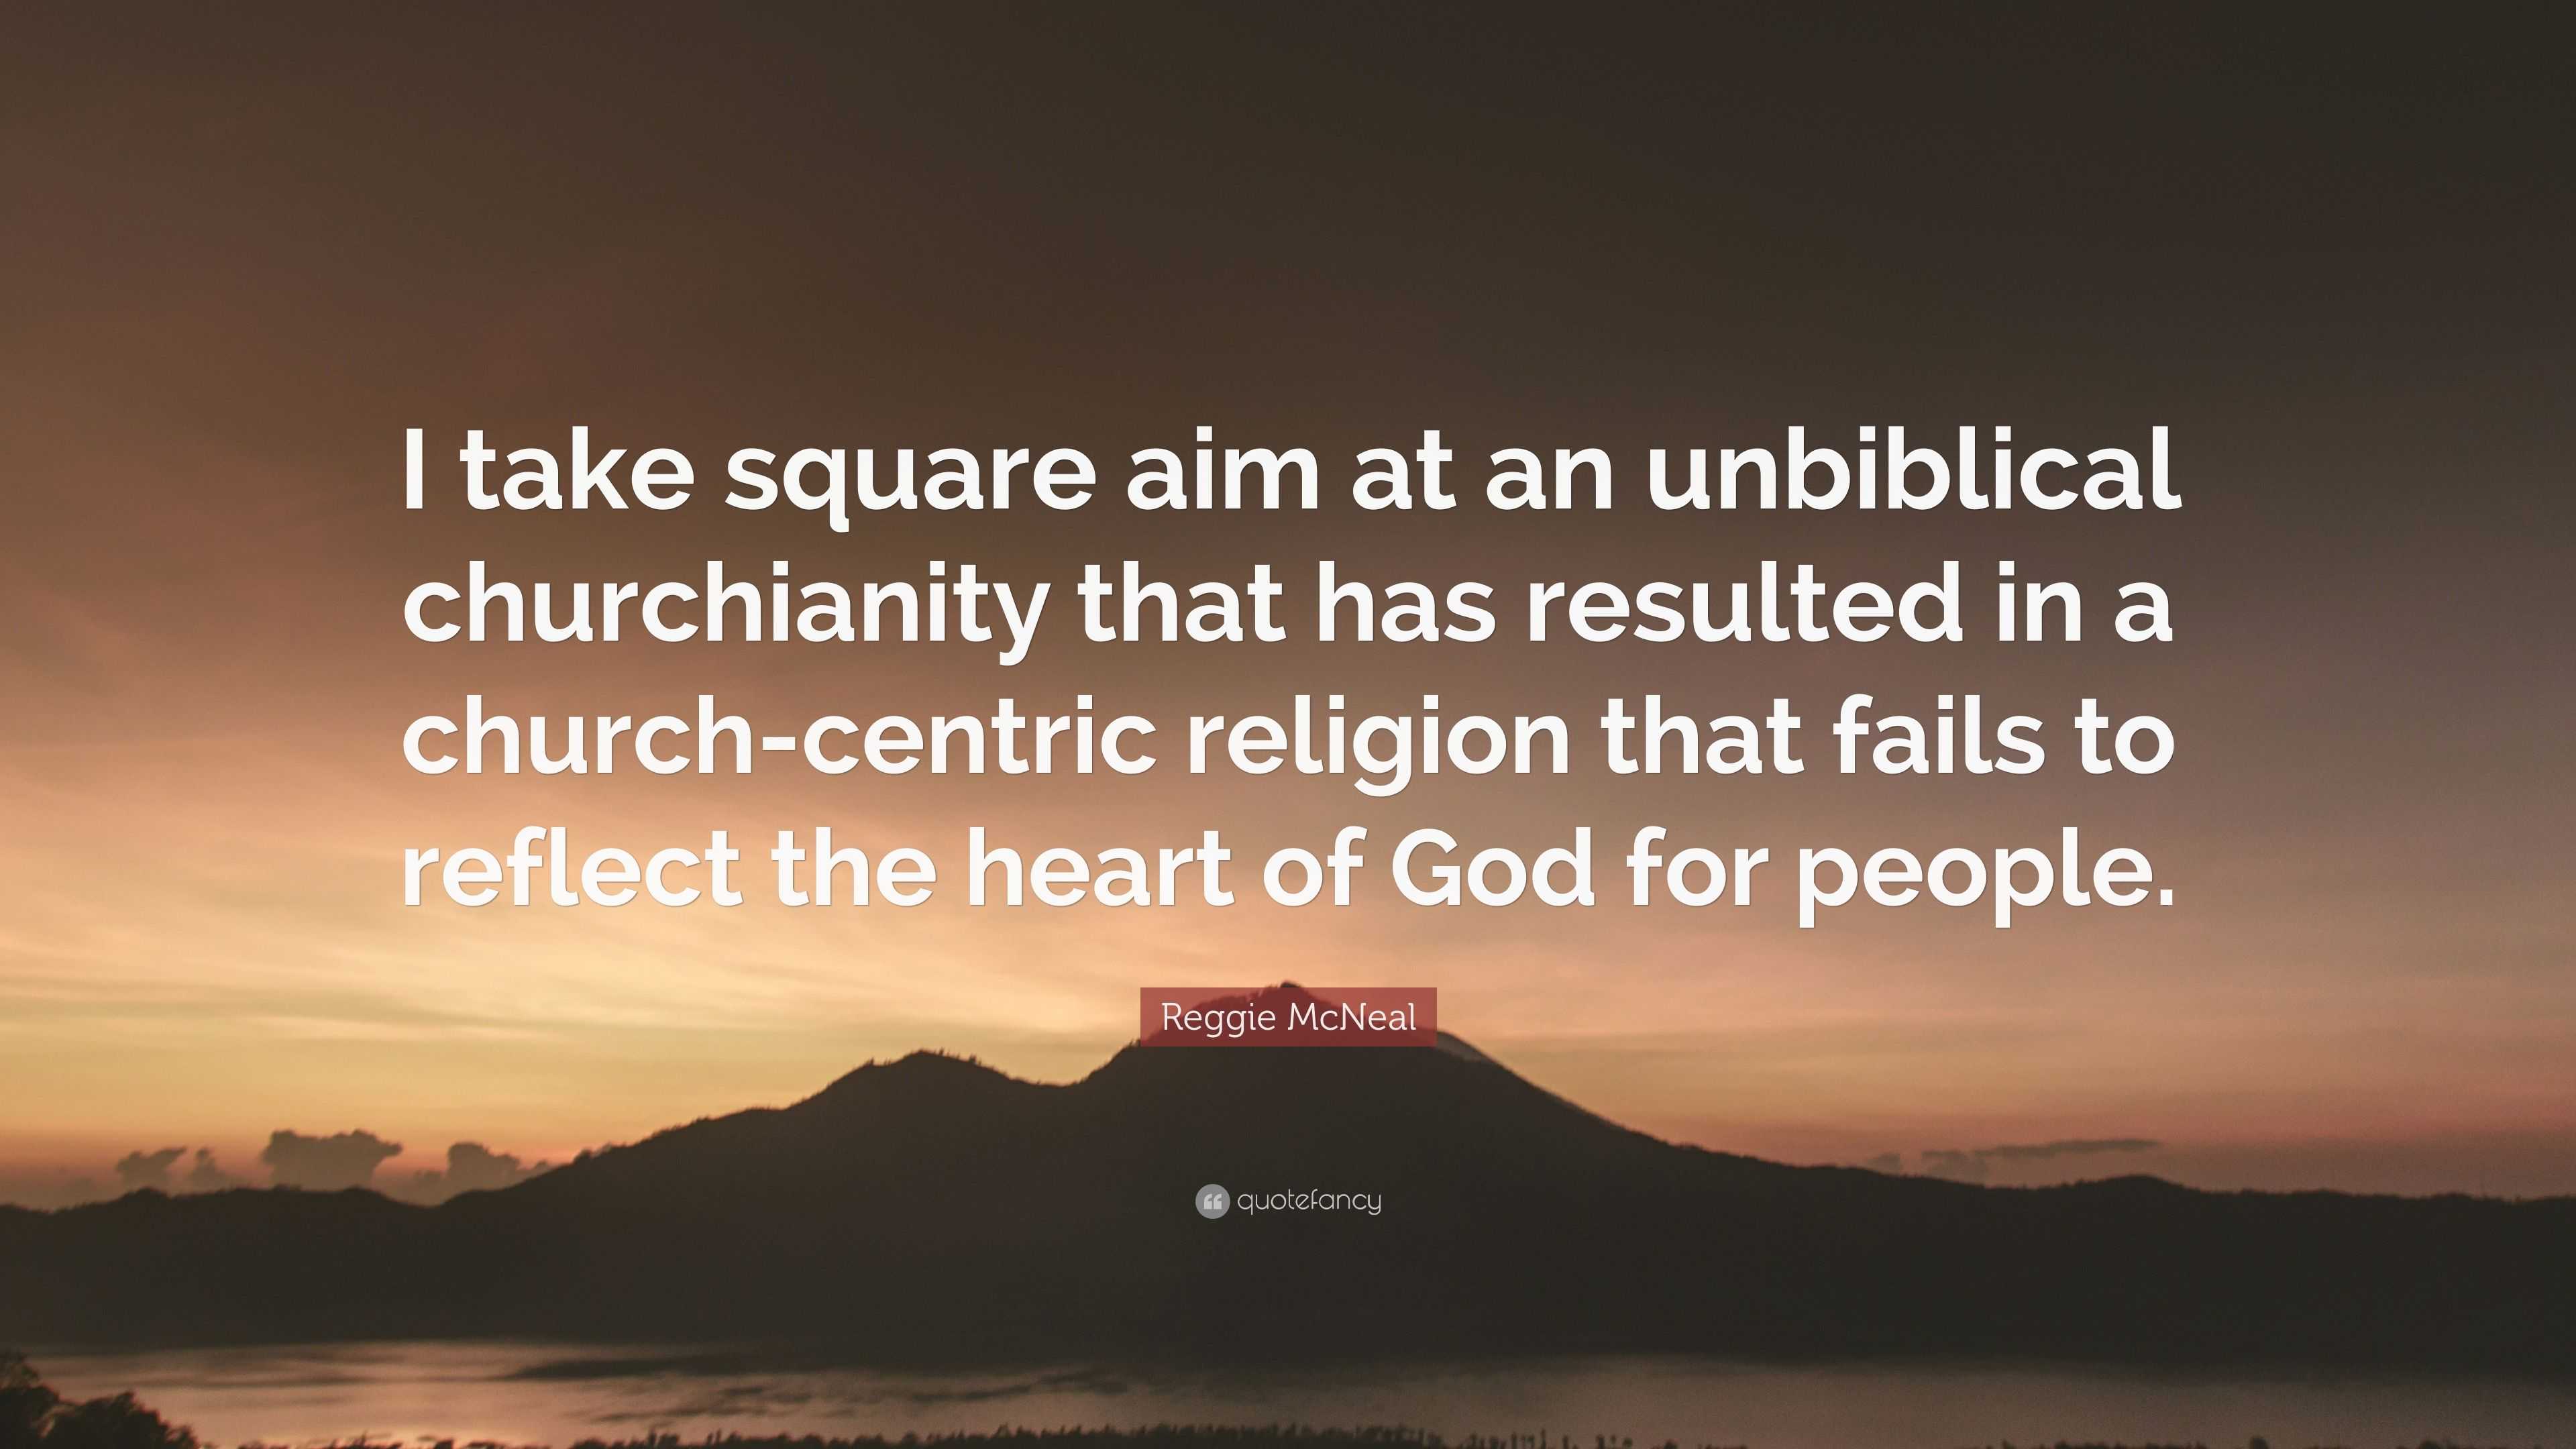 Reggie McNeal Quote: “I take square aim at an unbiblical churchianity that  has resulted in a church-centric religion that fails to reflect the...”